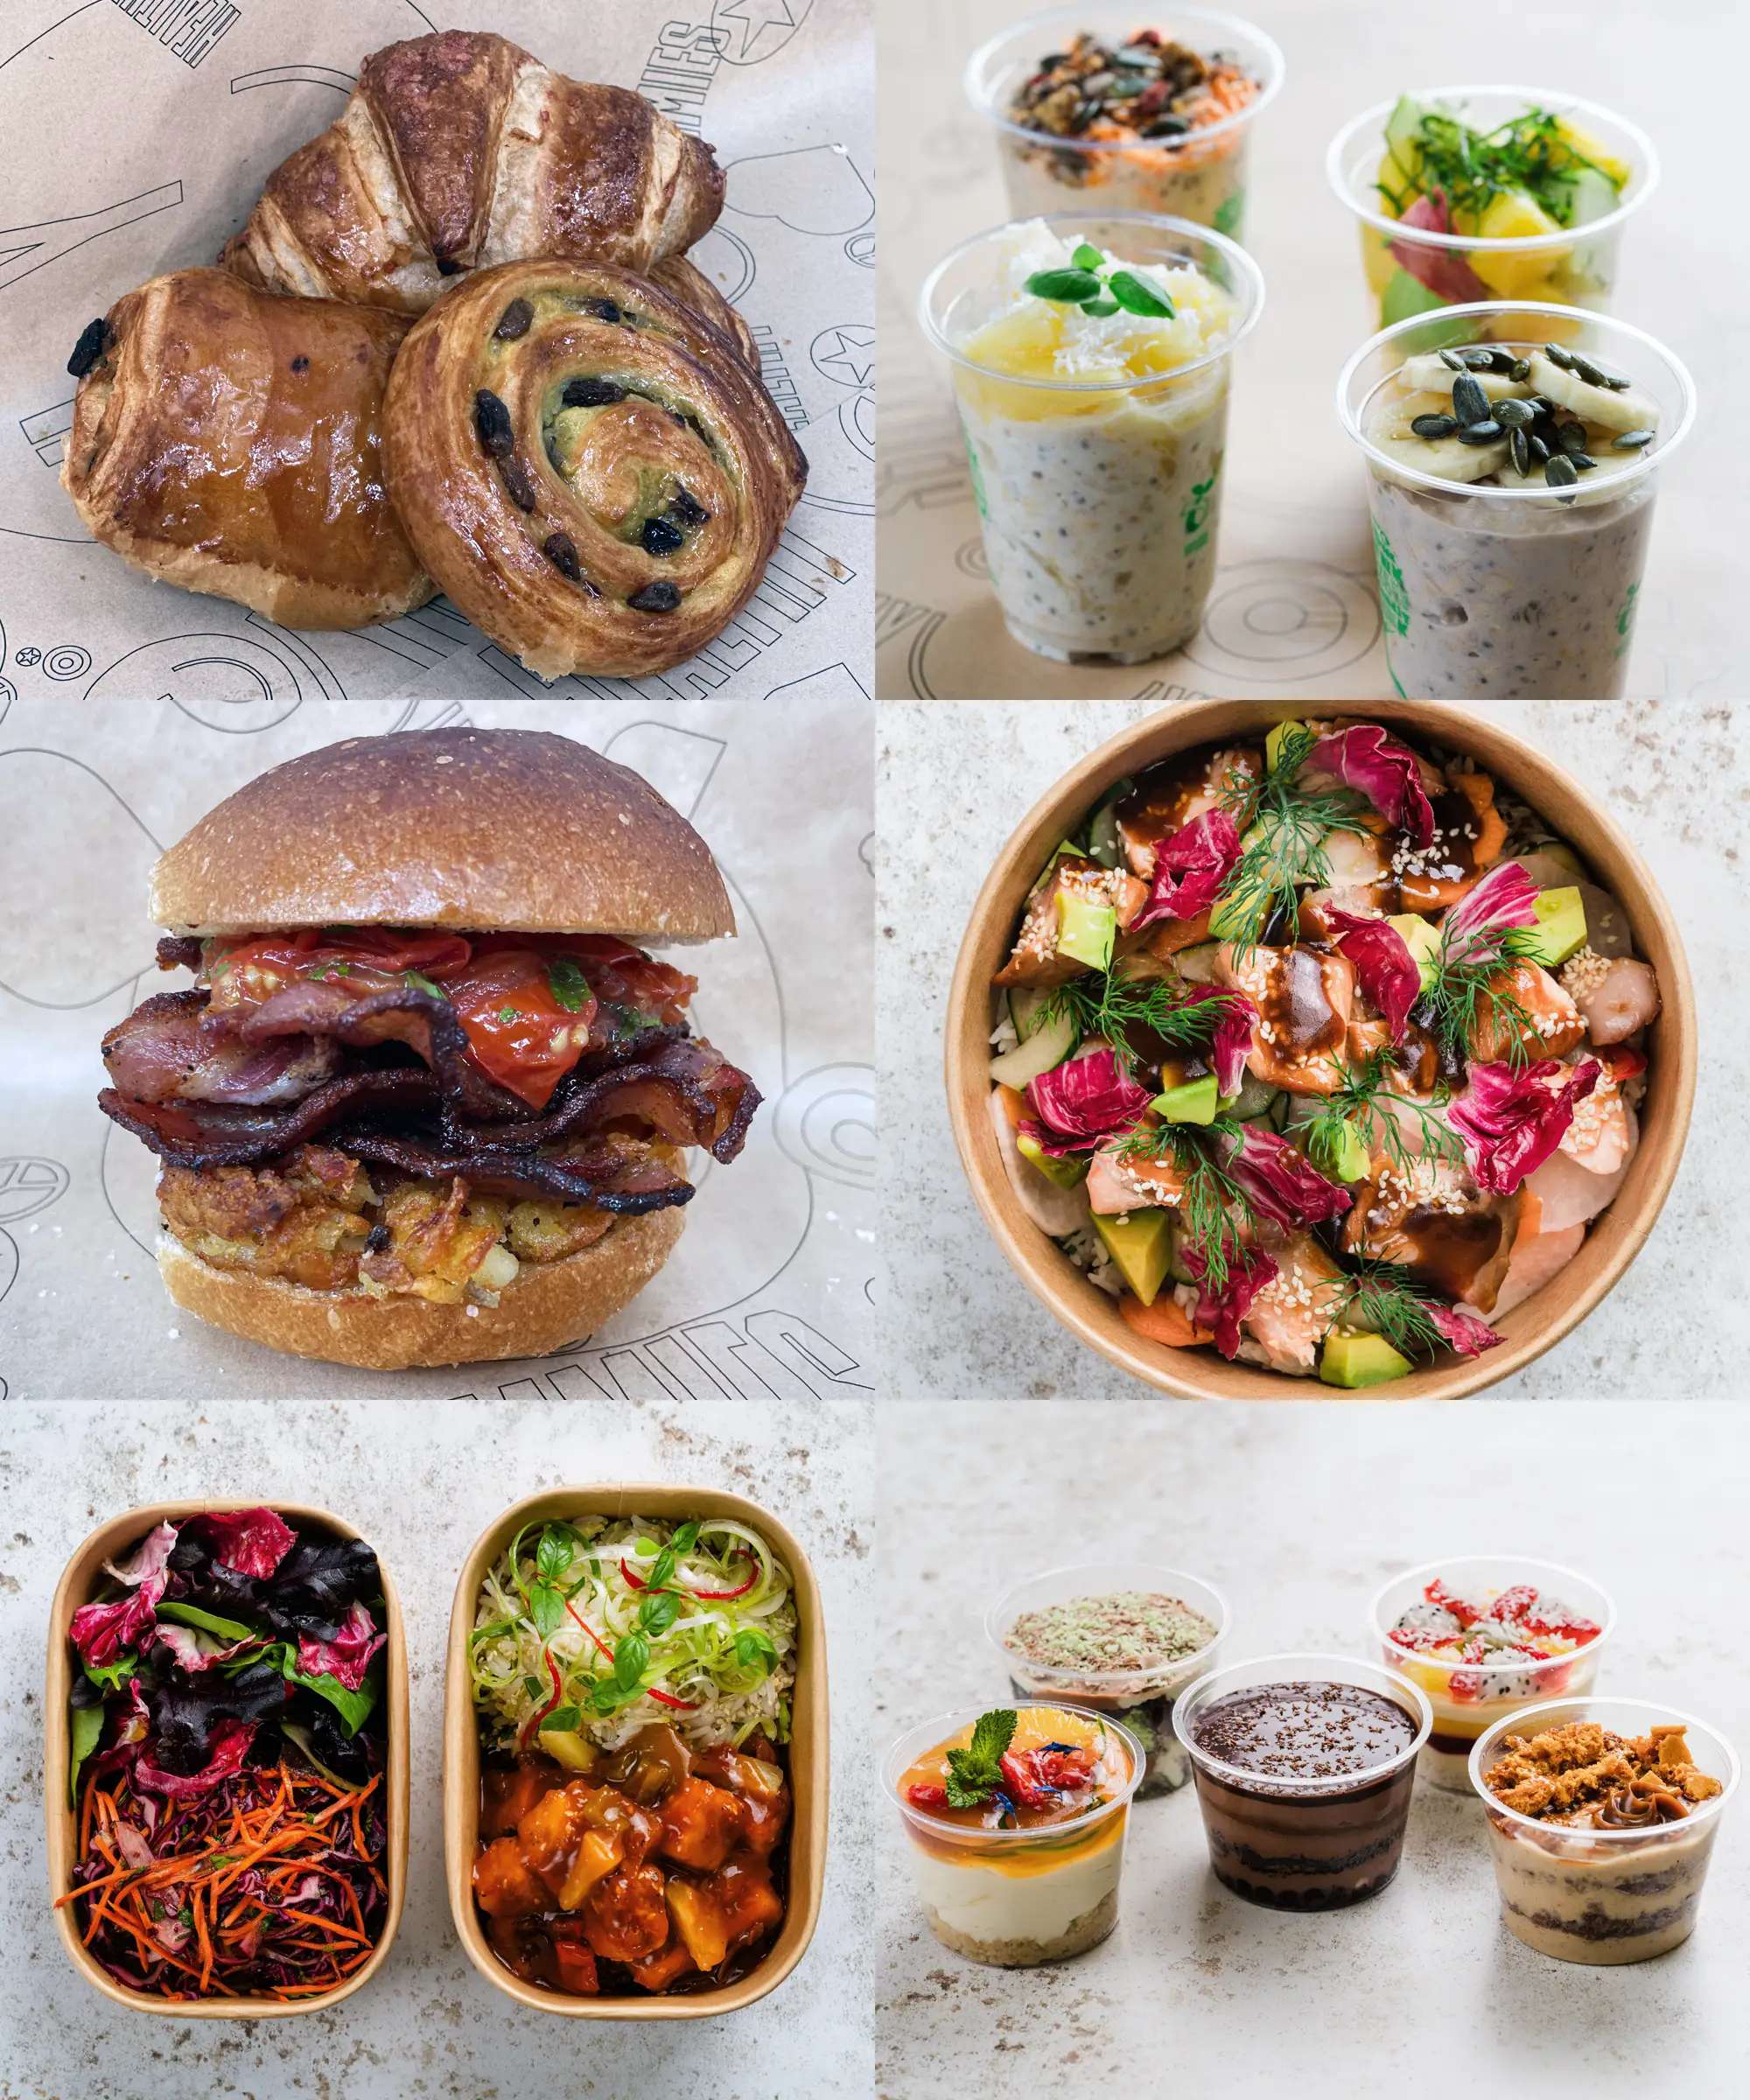 Montage of six hot box food photographs, in three rows of two. First row: pastries and breakfast pots. Second row: Breakfast roll and salad. Third row: two lunch hot boxes and some dessert pots.